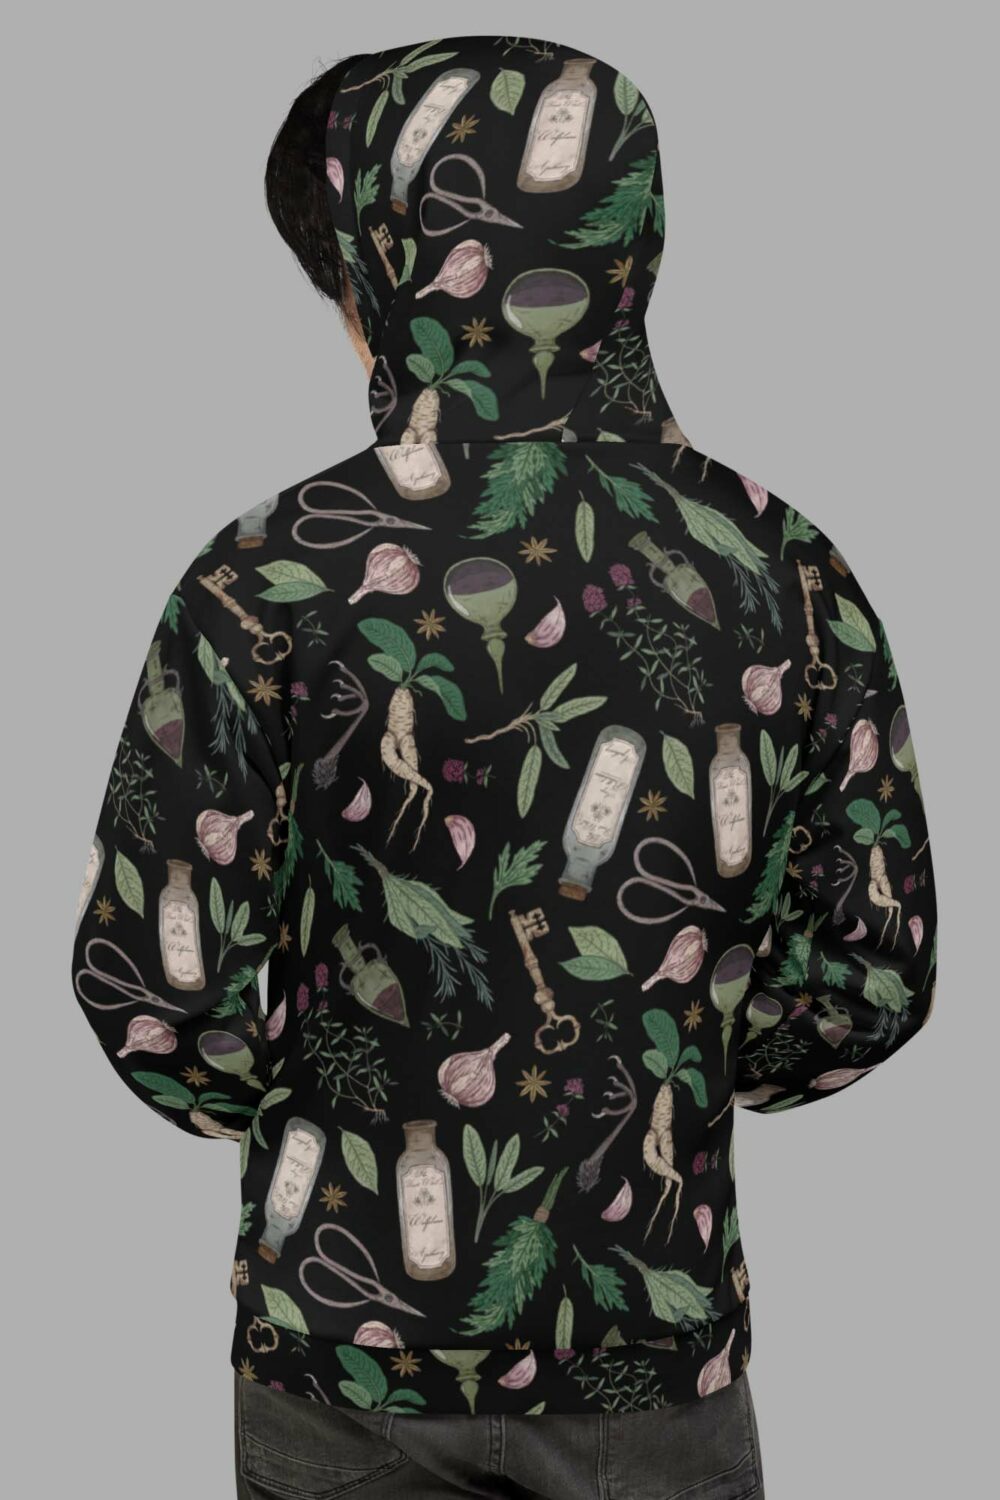 cosmic drifters hoodie back forest witch print